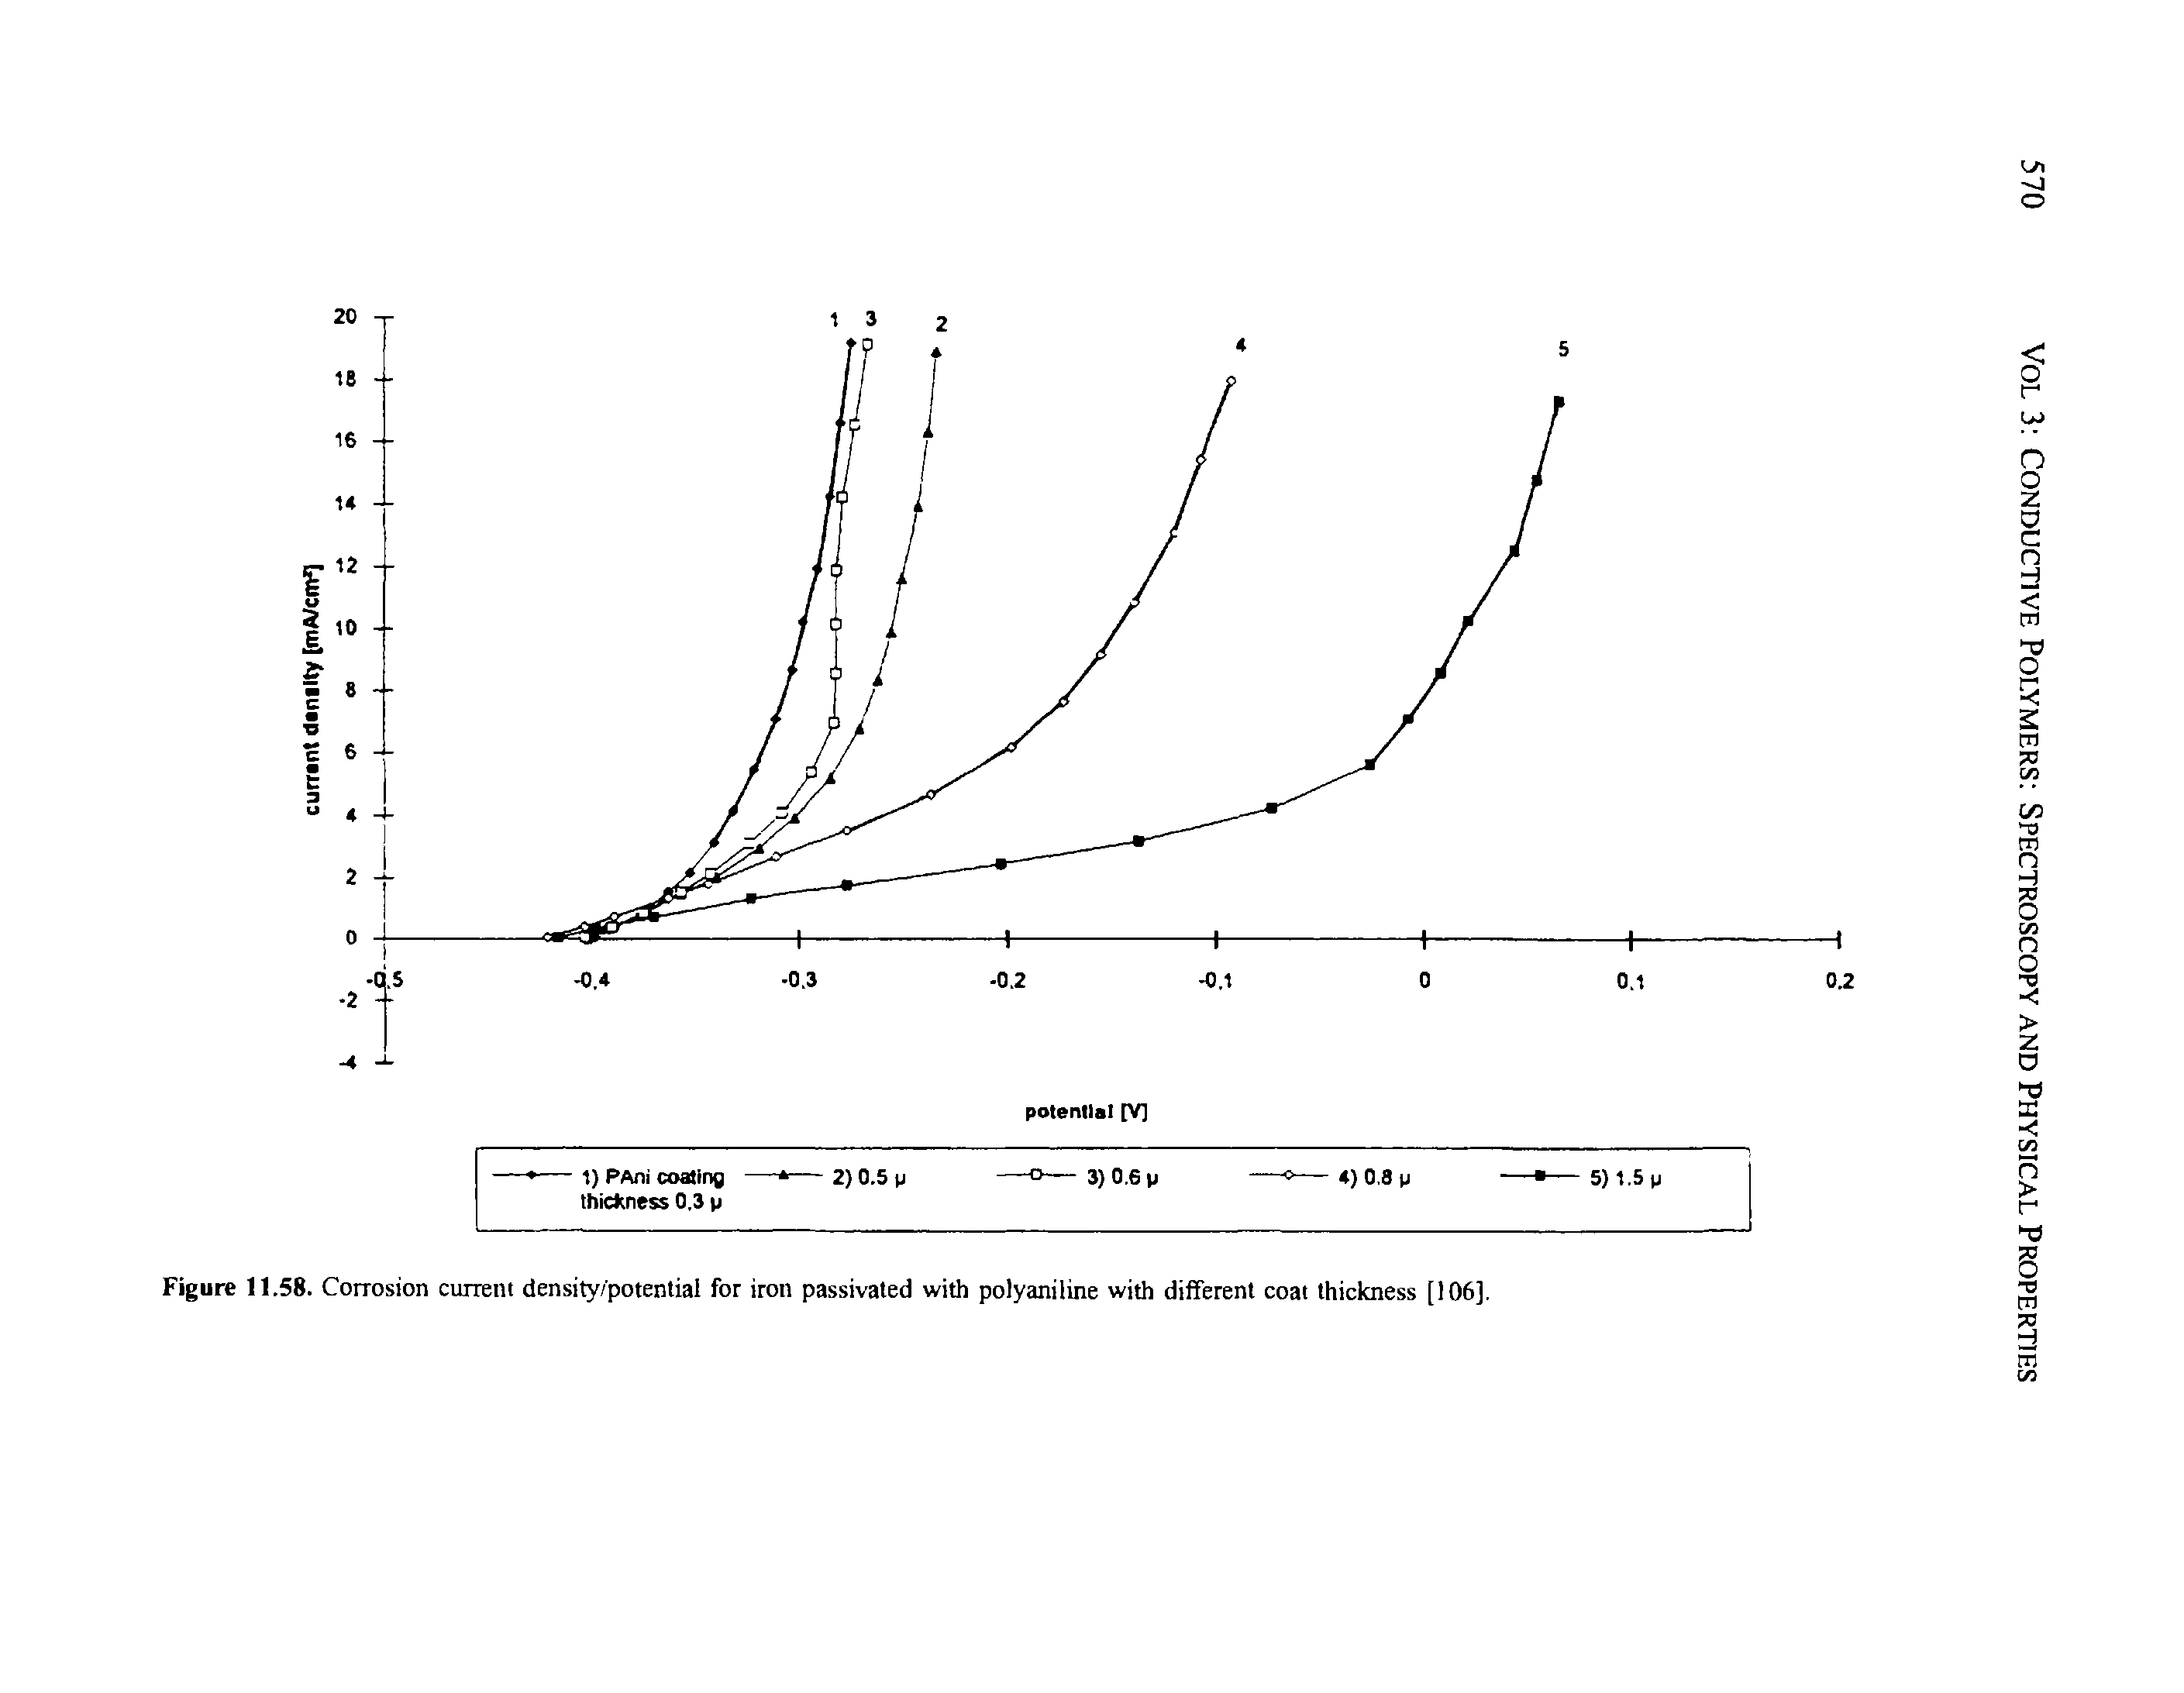 Figure 11.58. Corrosion current density/potential for iron passivated with polyaniline with different coat thickness [106].